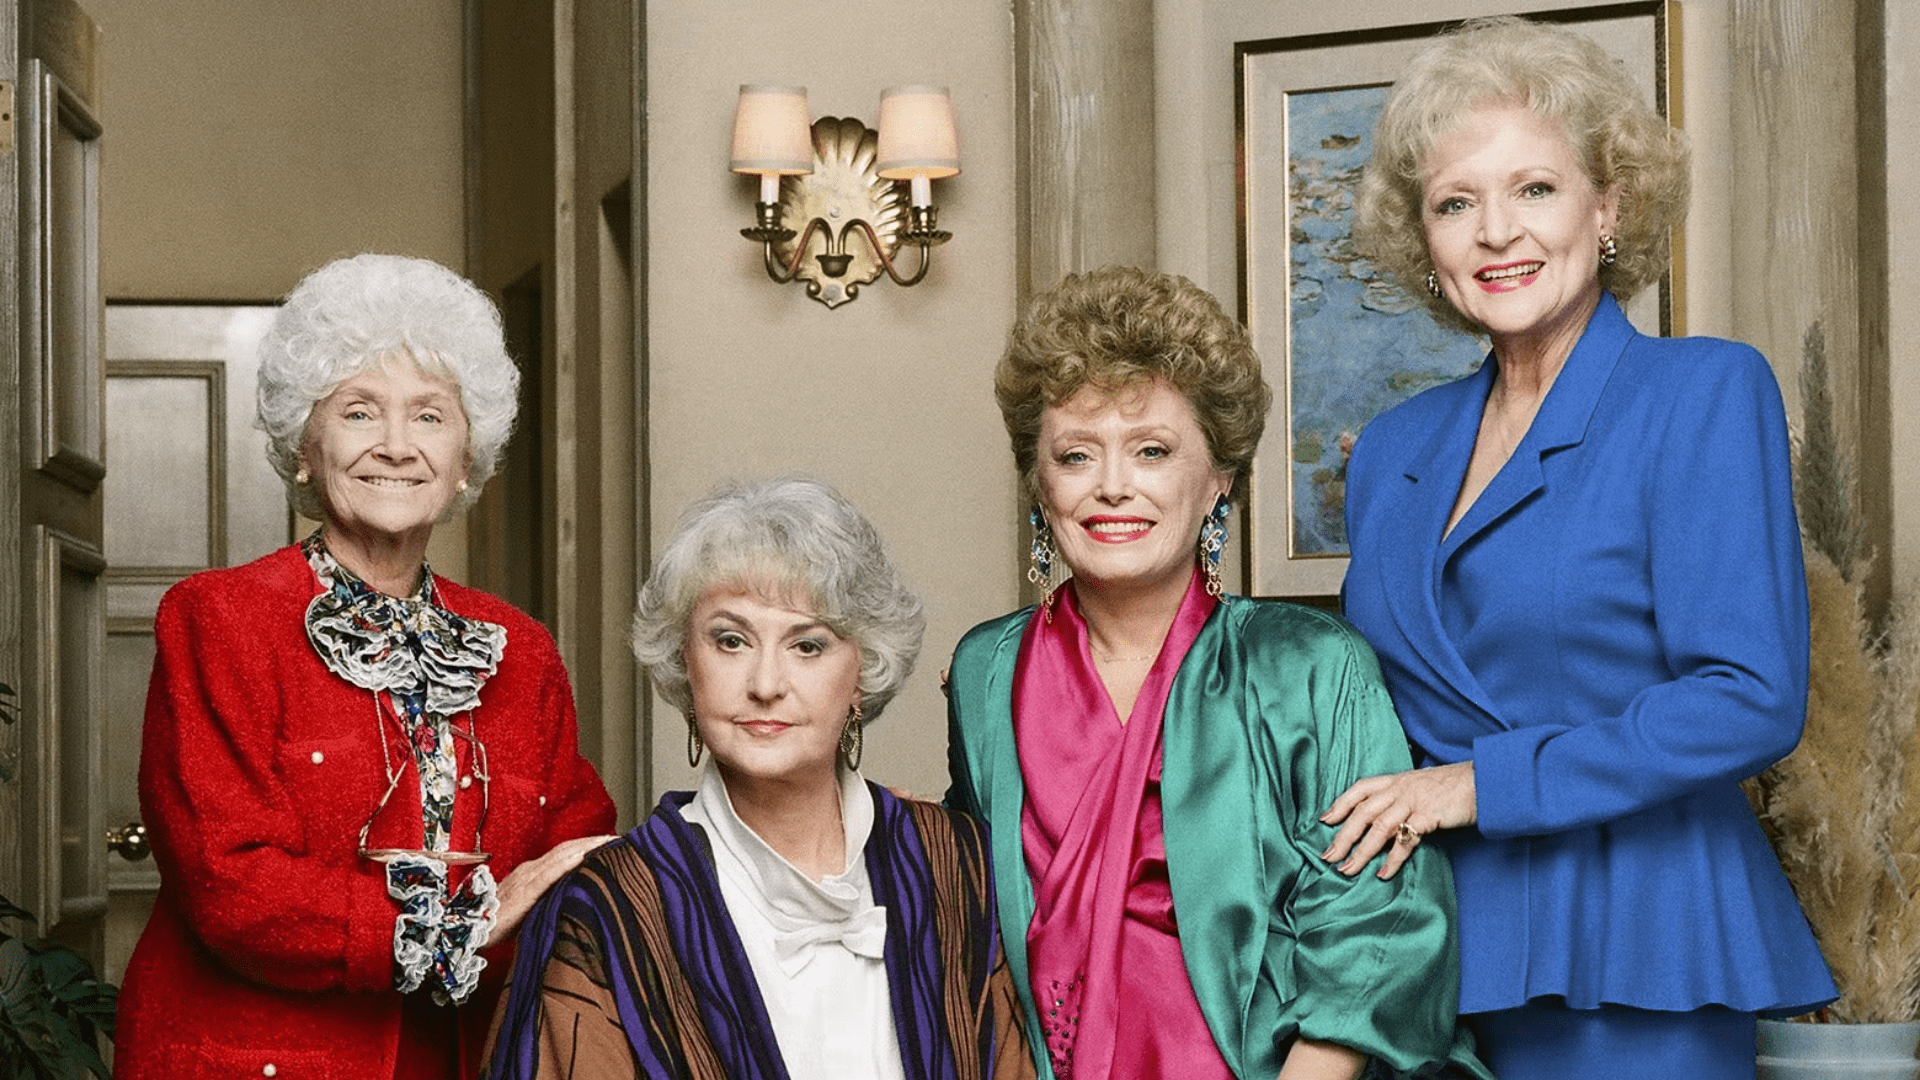 Ultimate List Of 117 The Golden Girls Facts For All Classic Sitcom Lovers - The Golden Girls Facts